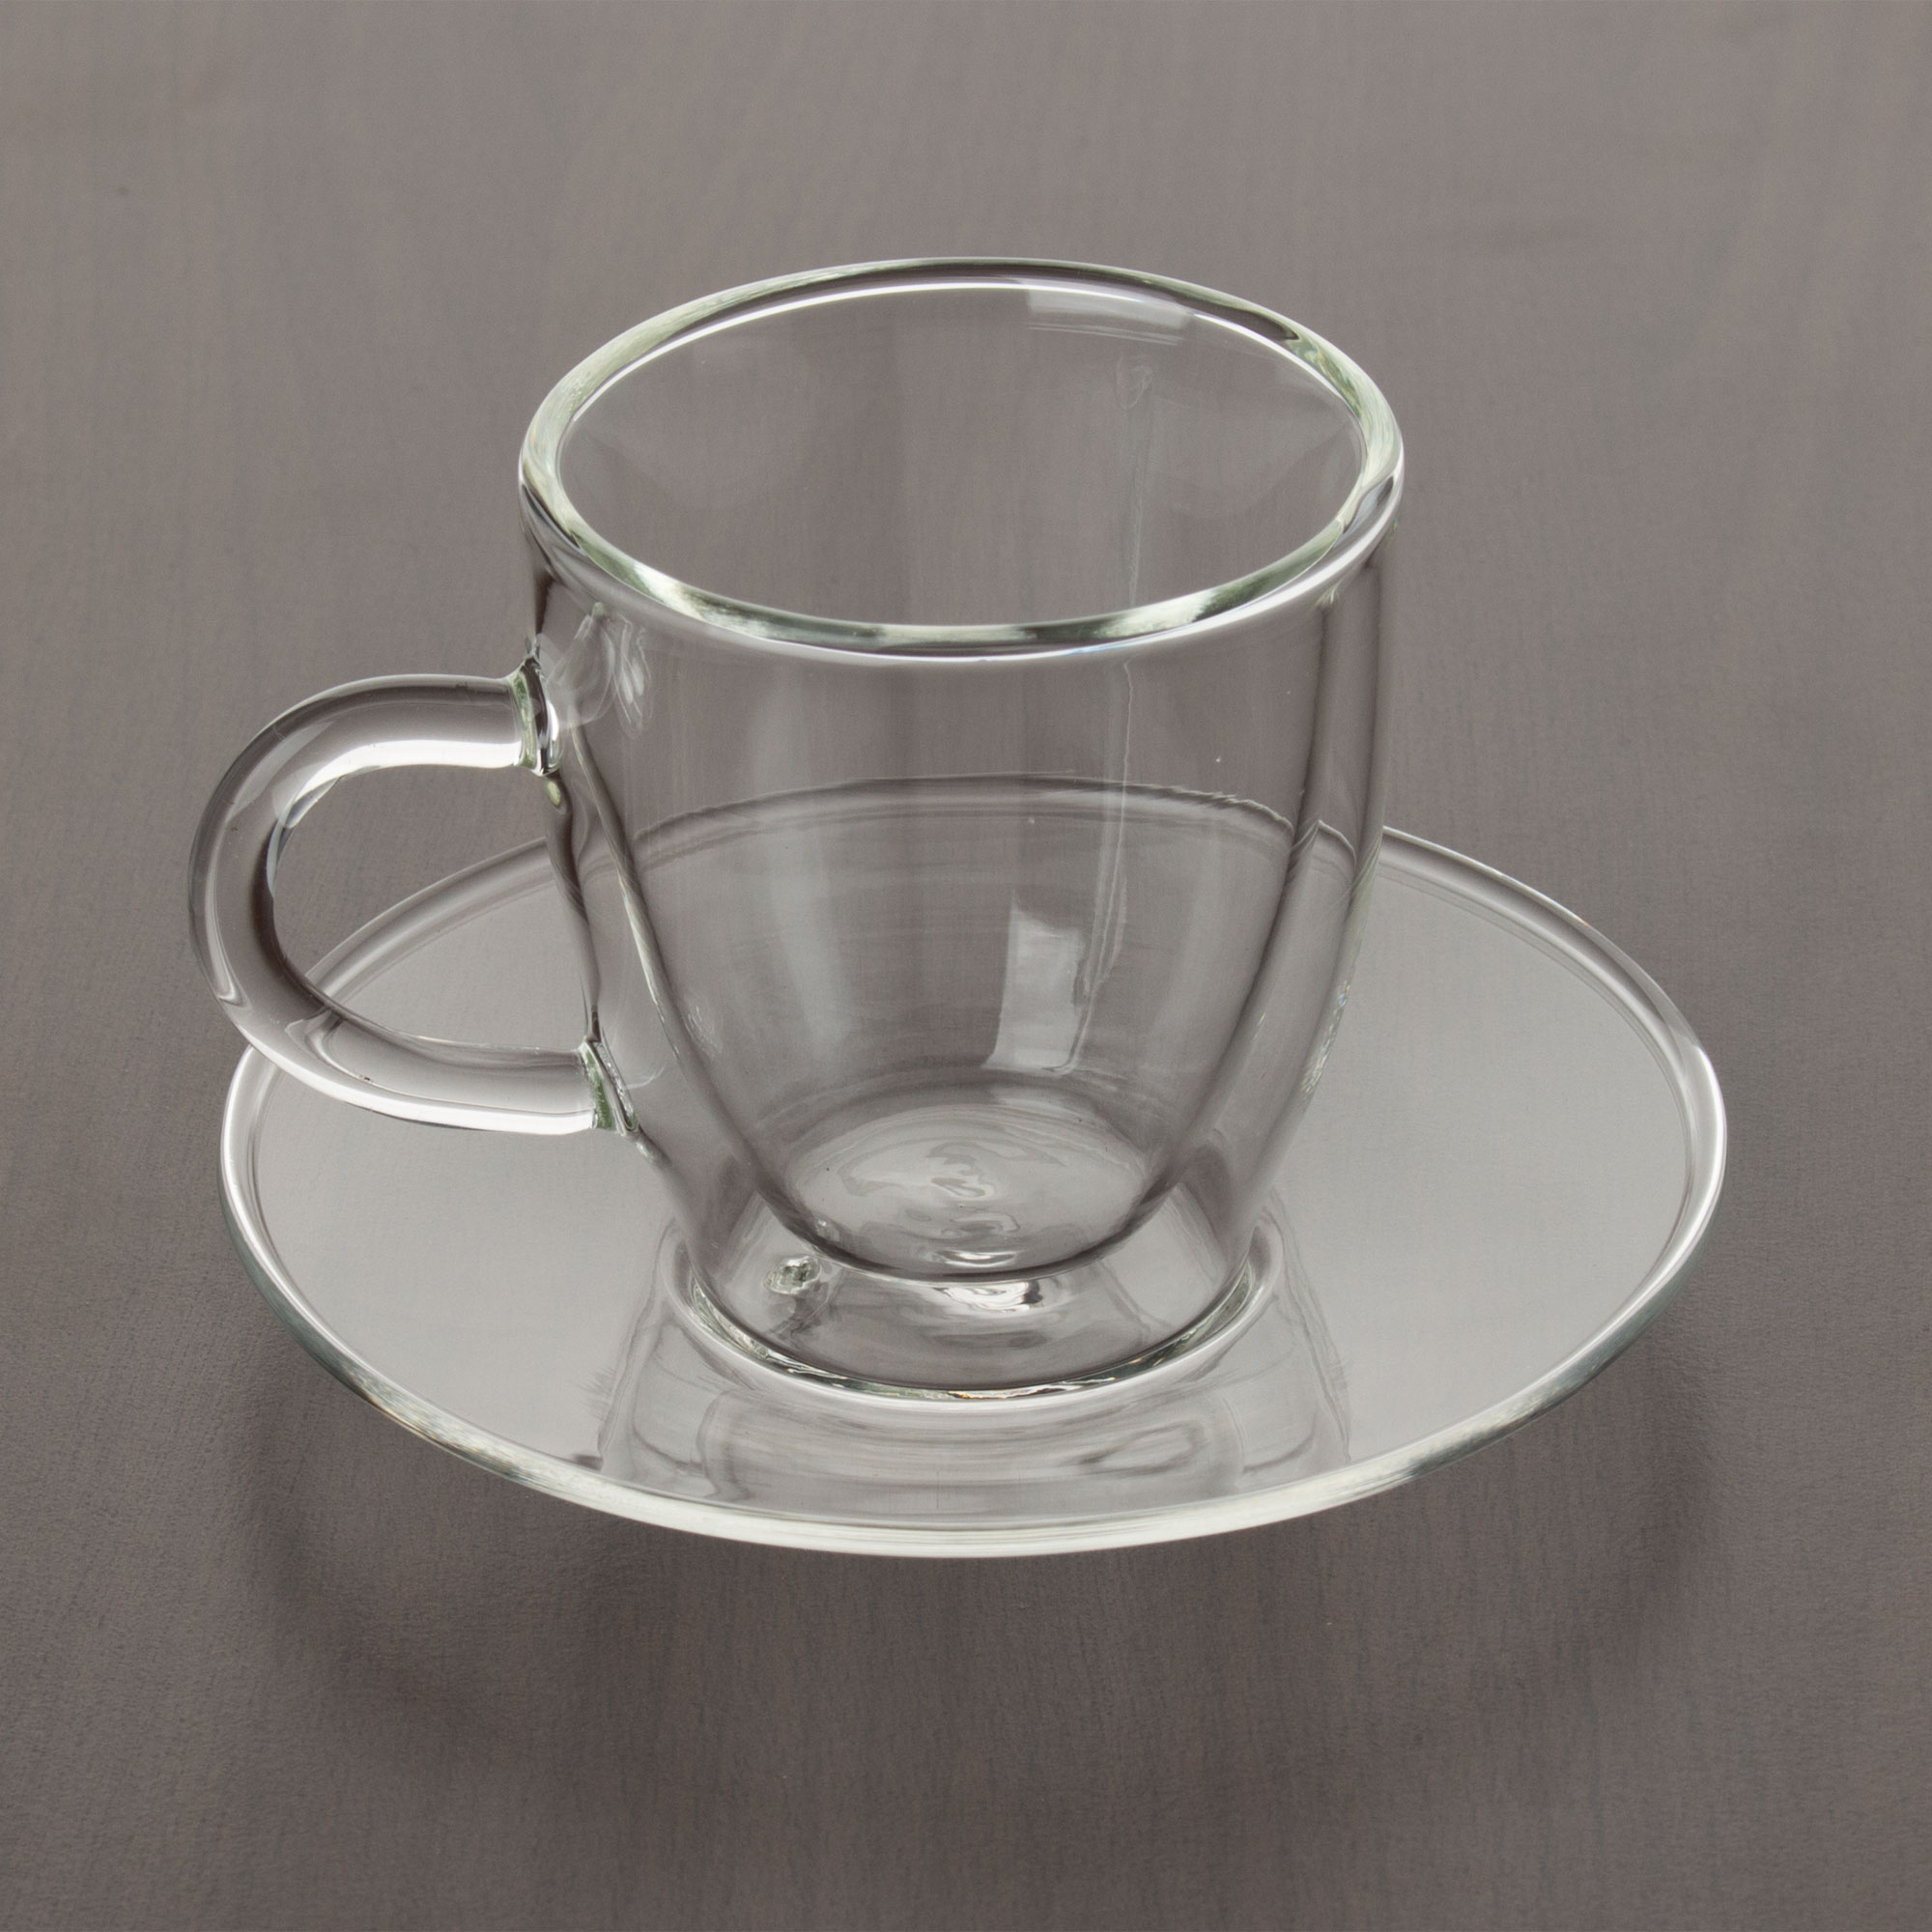 Espresso glass with handle and saucer, double-walled, Enjoy - 0,08l